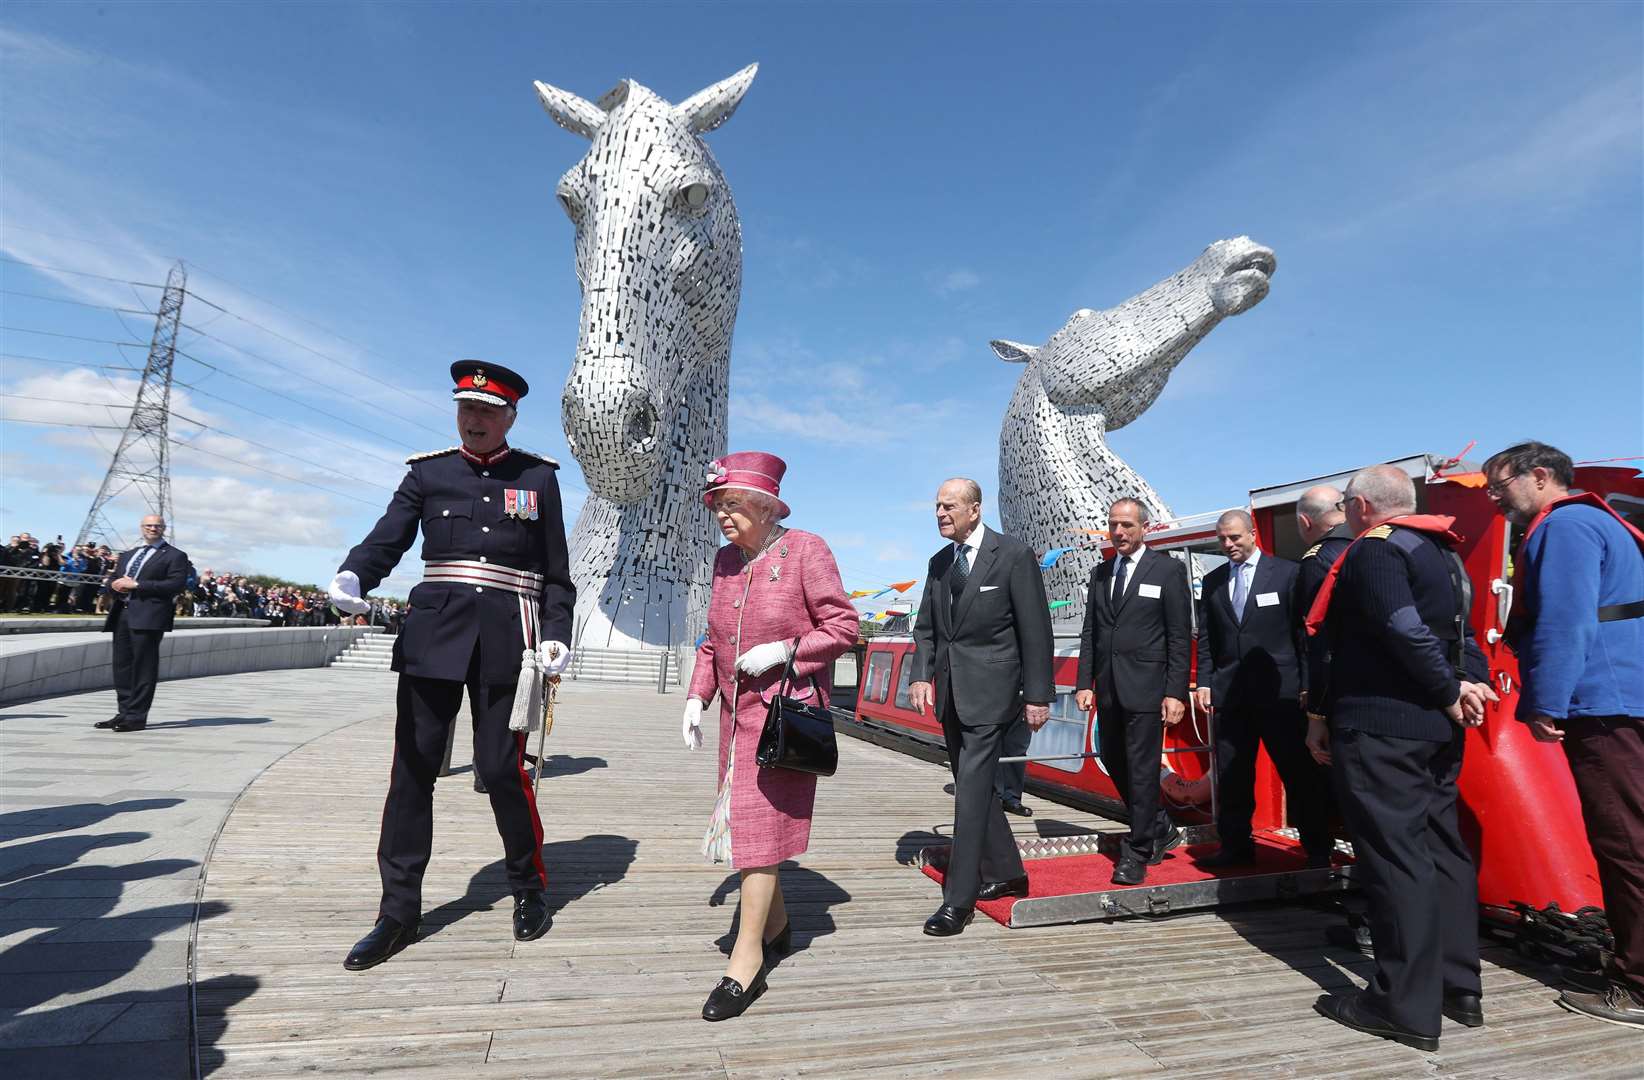 The Queen and Duke of Edinburgh visited The Kelpies in 2017 (PA)